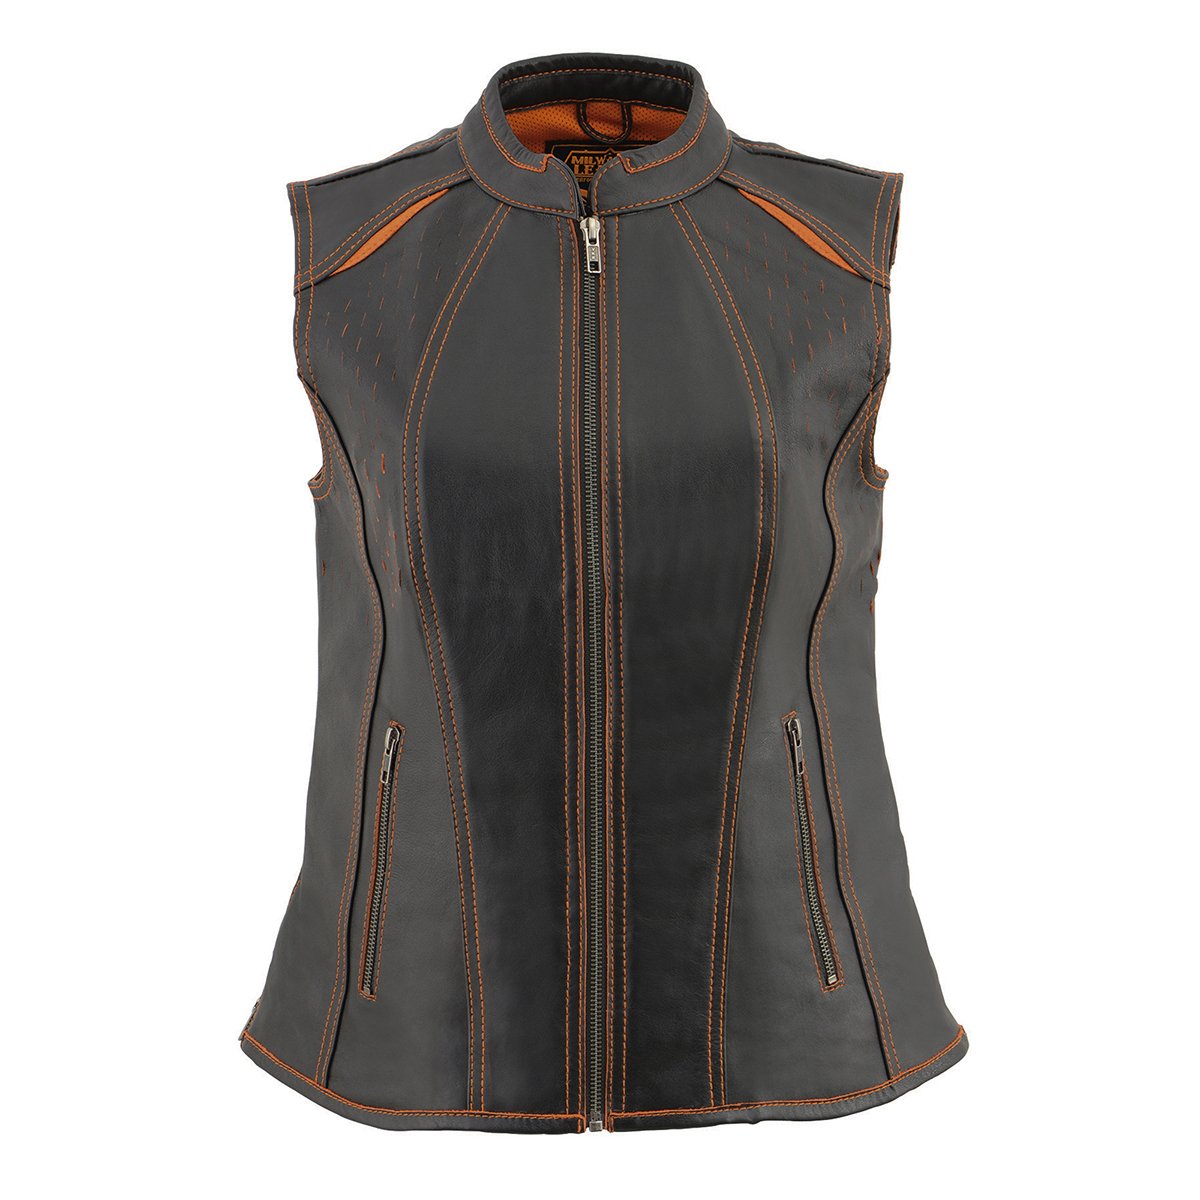 Milwaukee Leather MLL4507 Women's Black Leather Orange Accented Laser Cut Vented Scuba Style Motorcycle Rider Vest